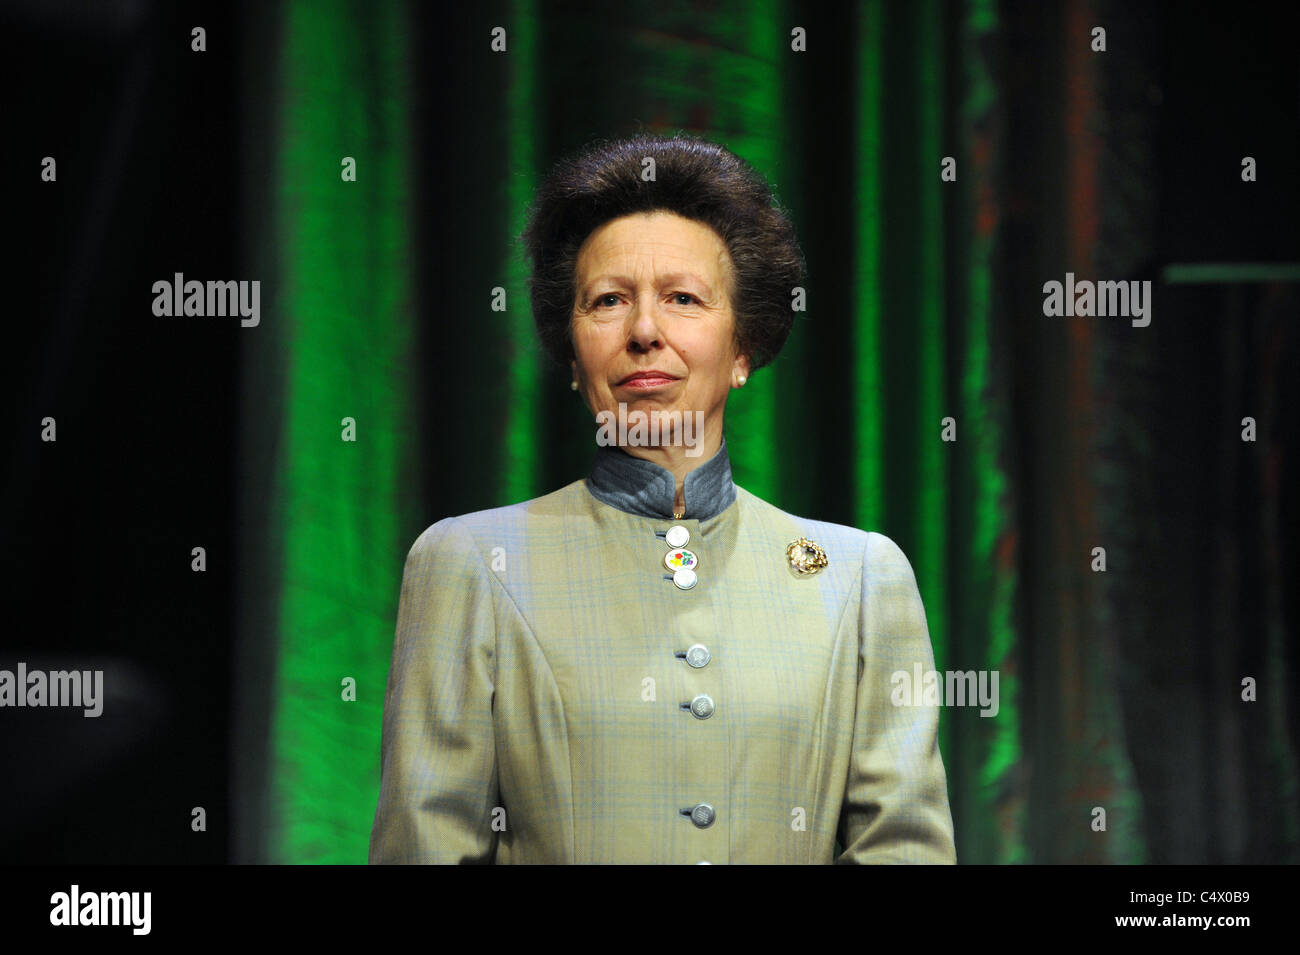 Her Royal Highness, The Princess Royal speaking at the Townswomen's Guild Annual Conference in Birmingham 24/6/11 Stock Photo